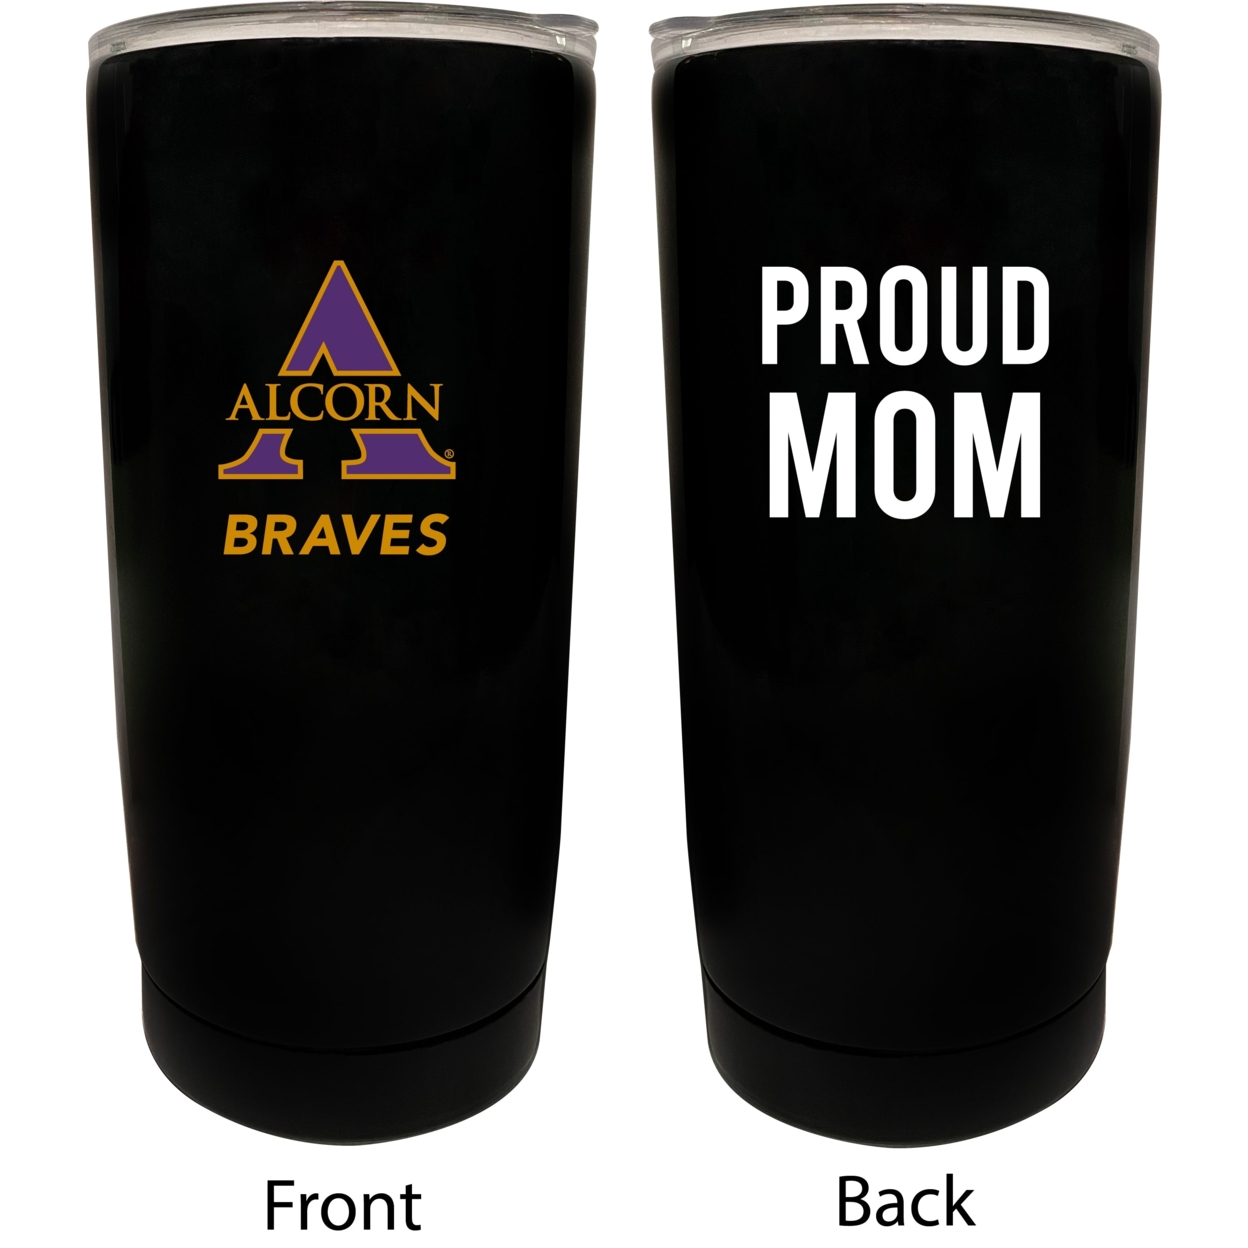 Alcorn State Braves Proud Mom 16 Oz Insulated Stainless Steel Tumblers